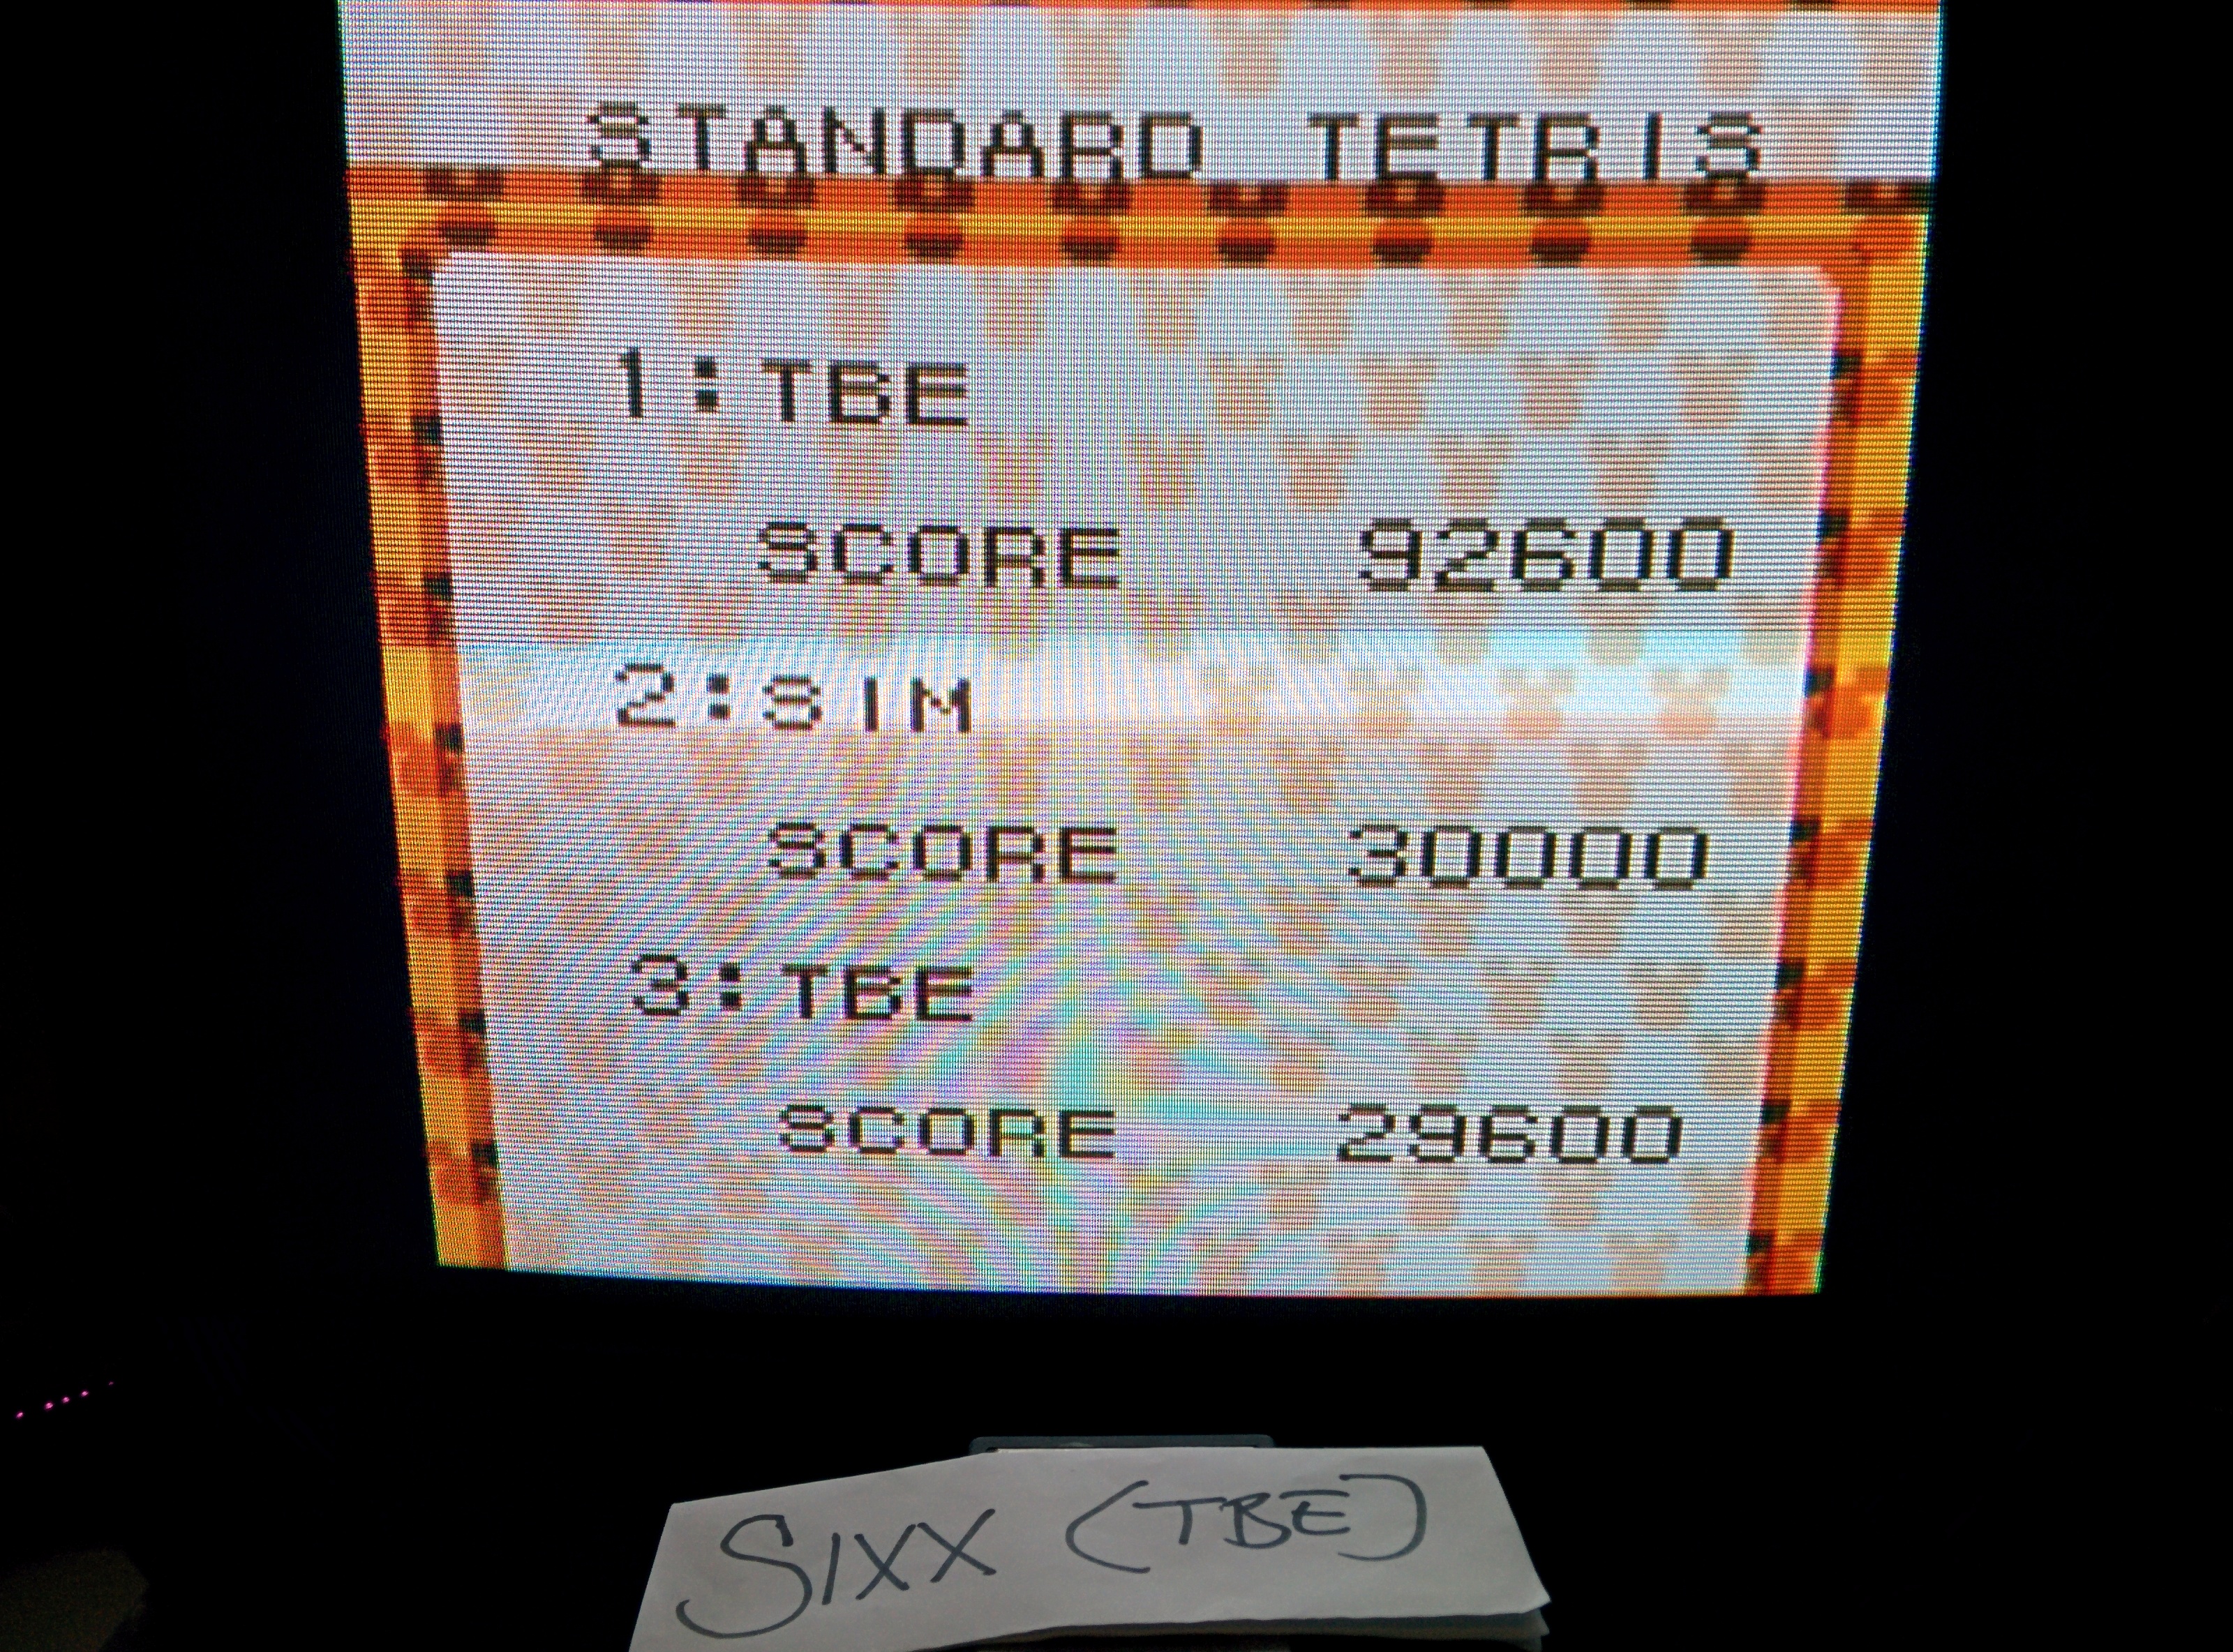 Sixx: Magical Tetris Challenge: Standard Tetris [Normal Difficulty] (Game Boy Color Emulated) 92,600 points on 2014-07-15 15:44:12